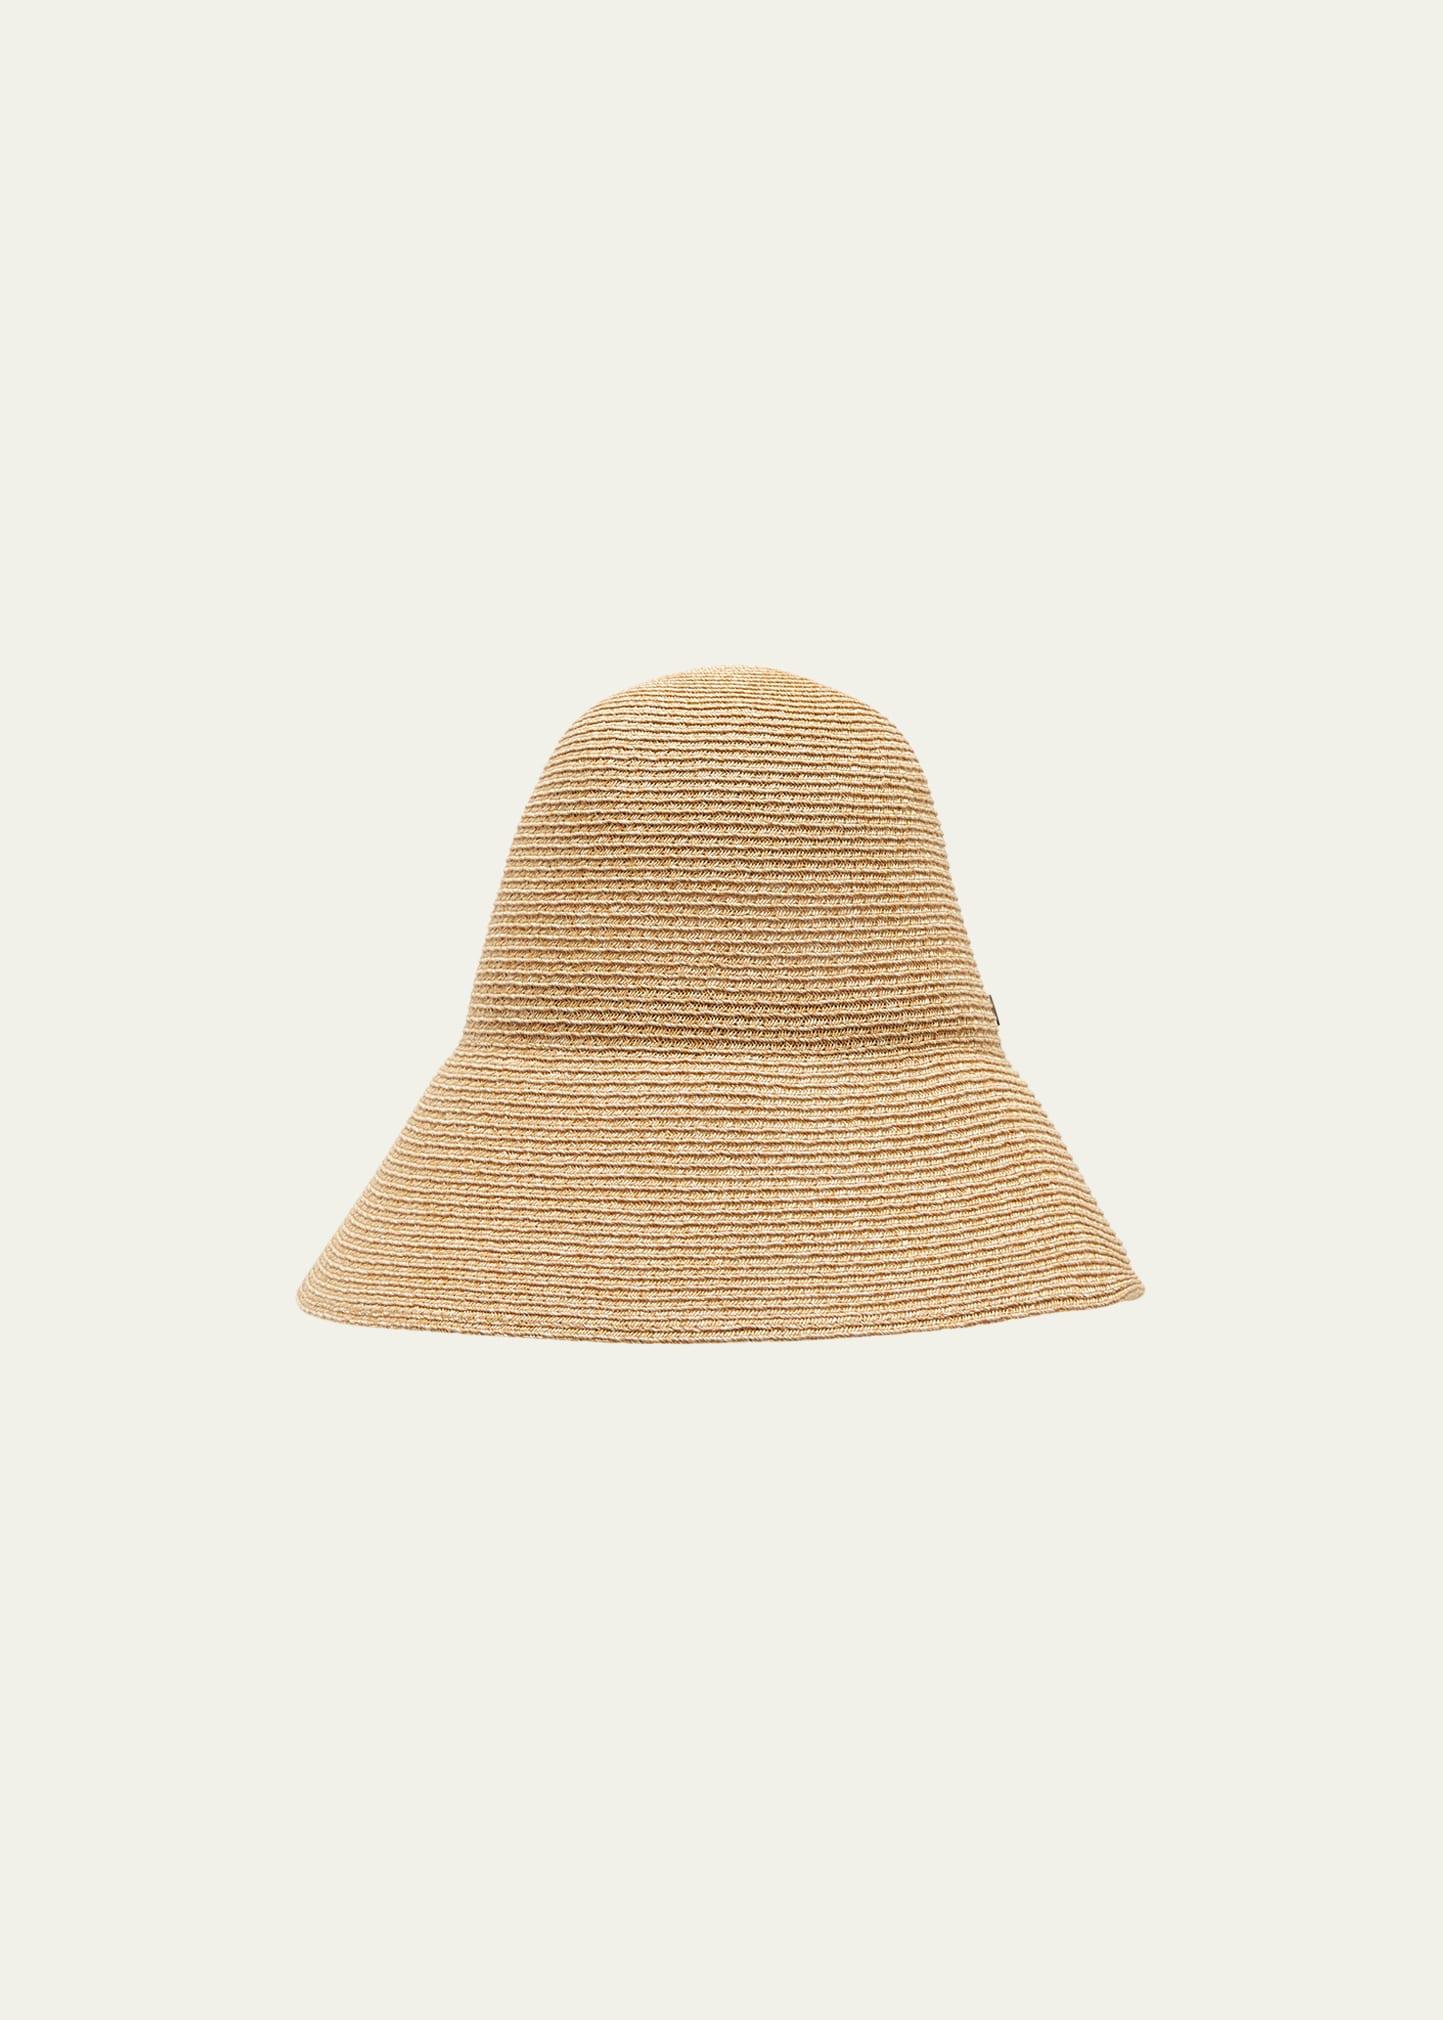 Totême Logo Straw Structured Hat in Natural | Lyst